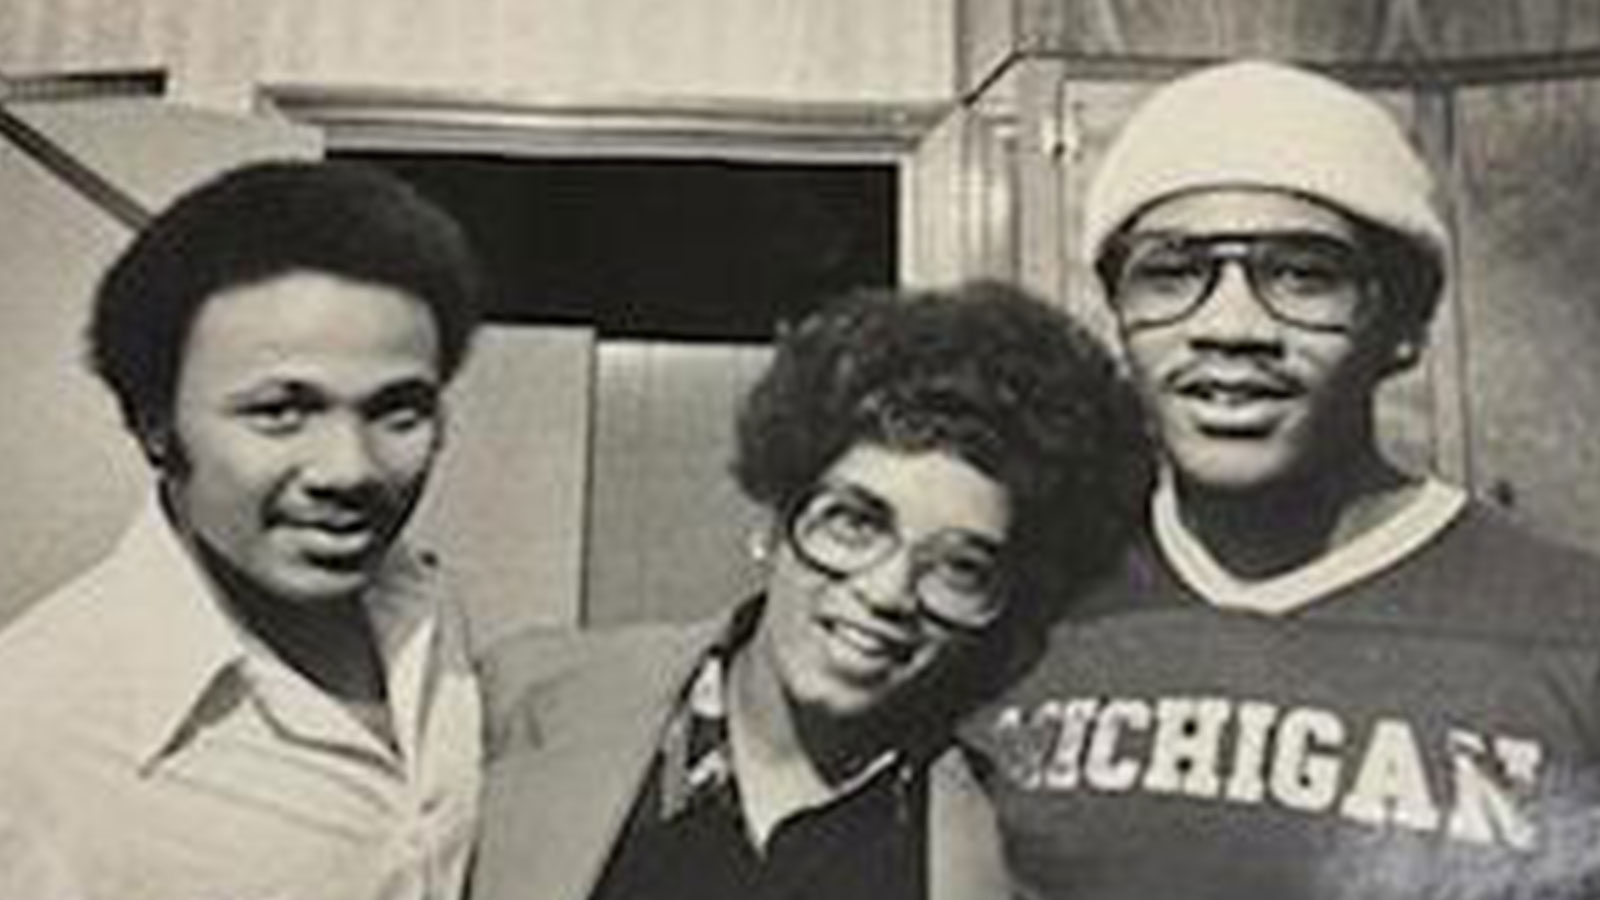 Journalist, Dr. Barbara Reynolds, with Martin Luther King III (left) and the now late Dexter Scott King (on right wearing hat) in their younger years.